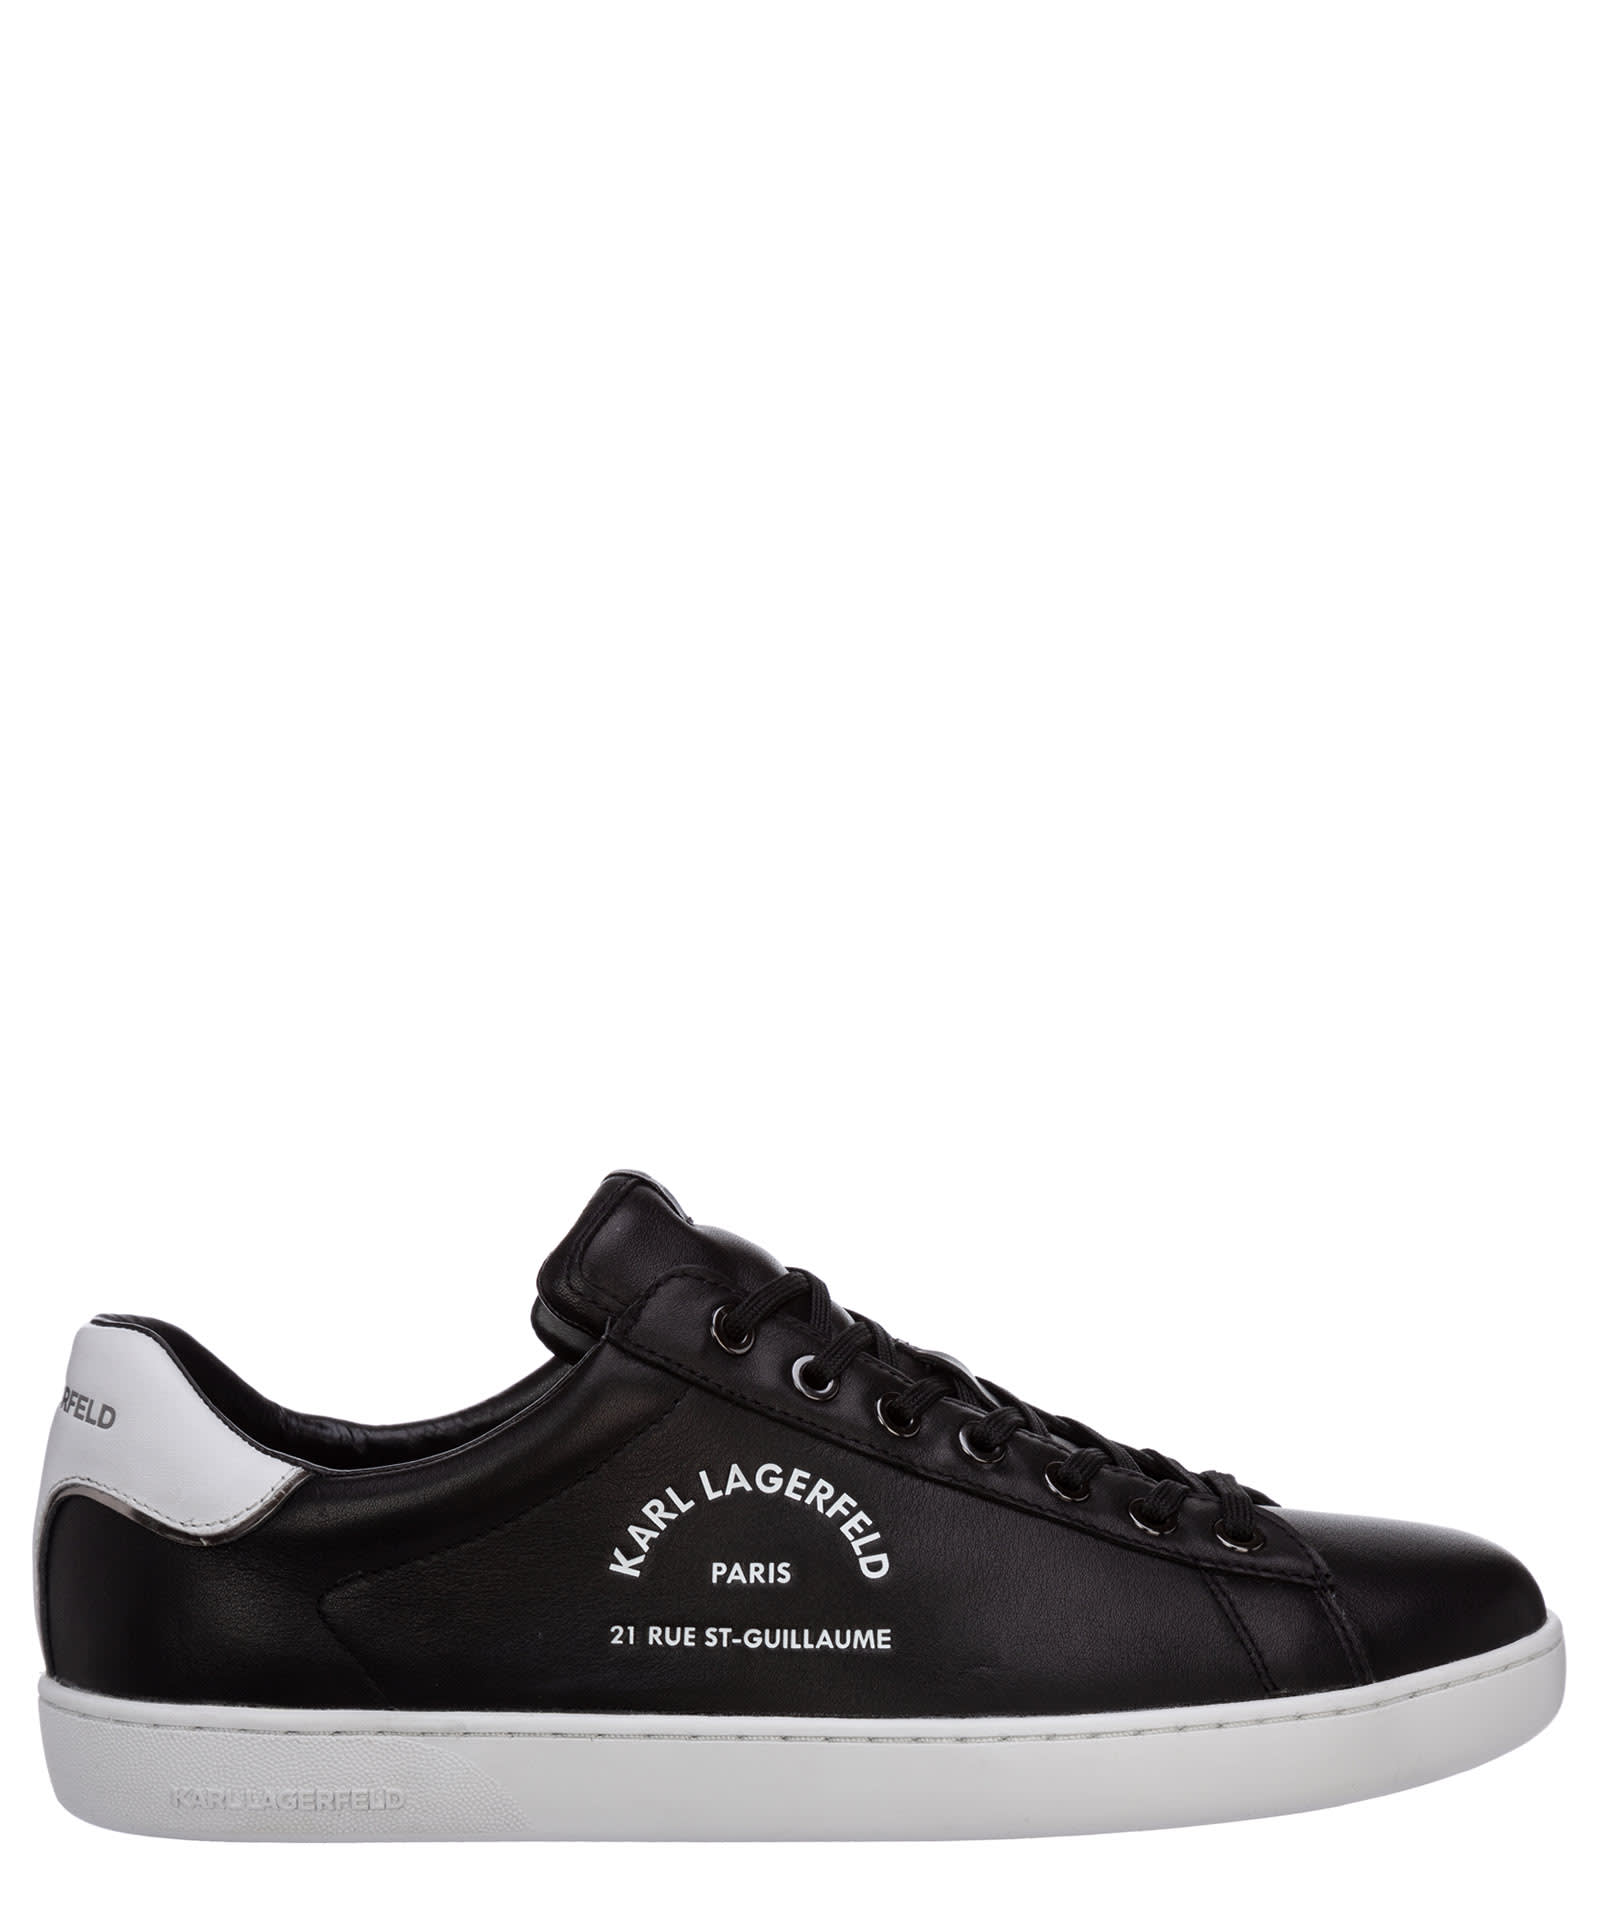 Karl Lagerfeld Rue St Guillaume Leather Sneakers